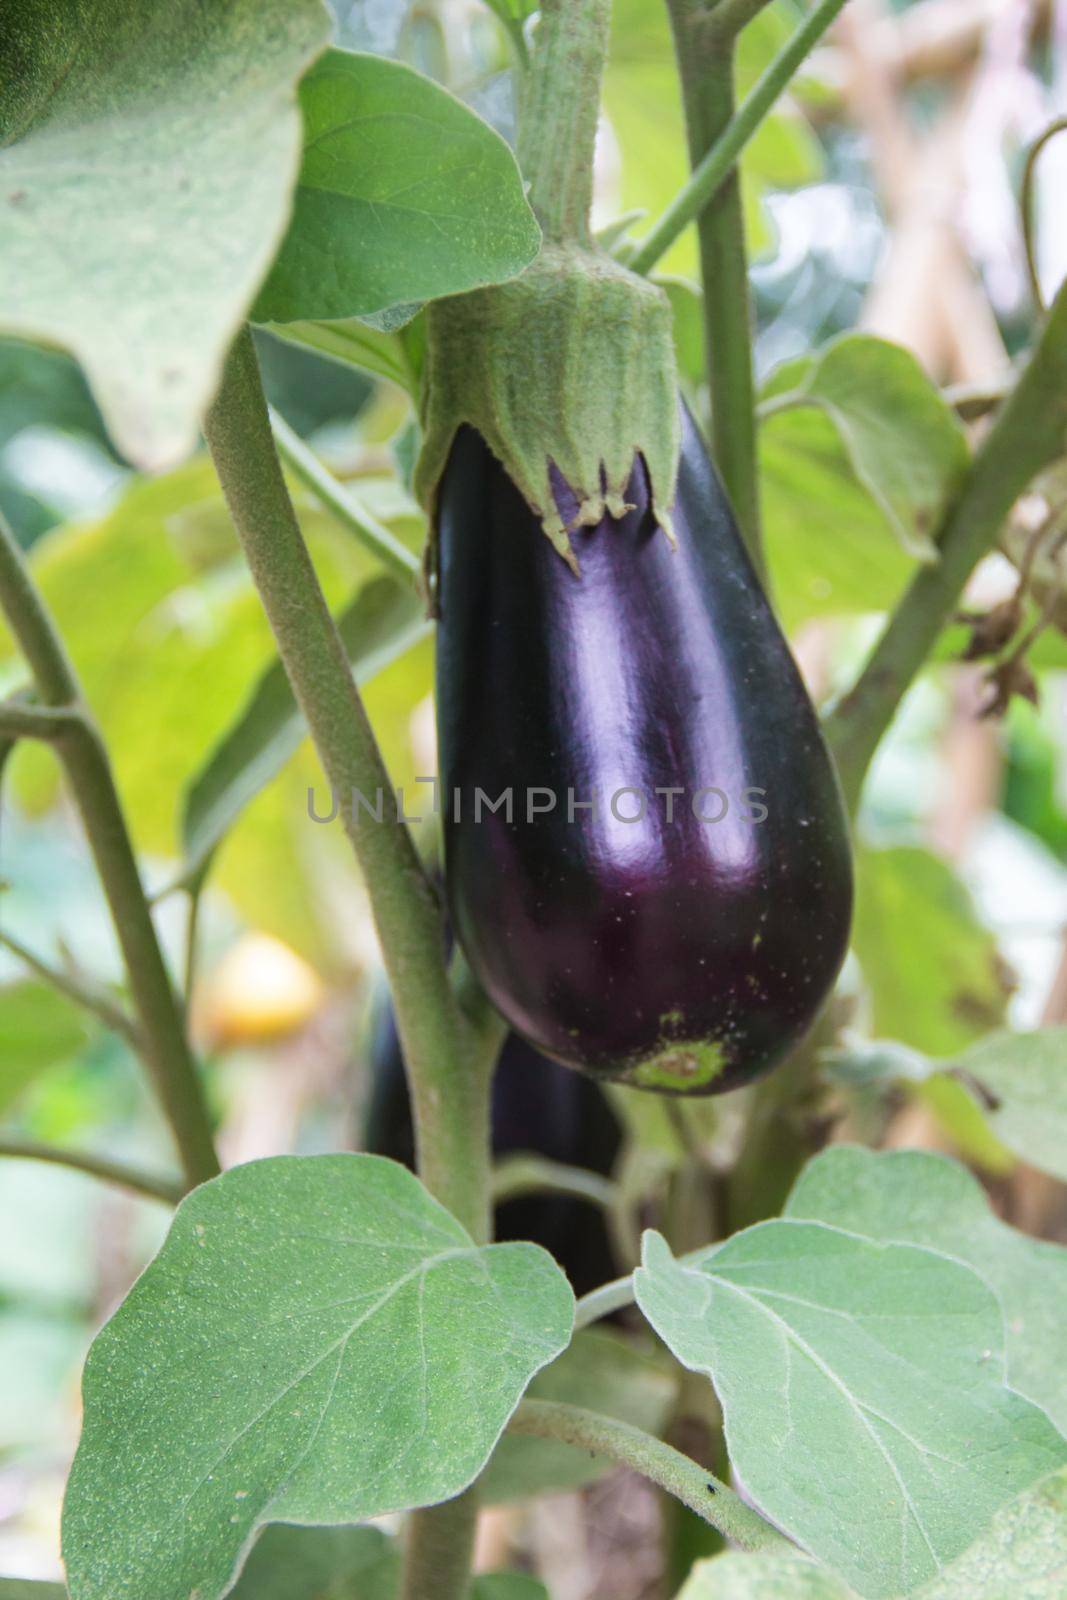 flowers and fruits of violet aubergines in the organic garden plant